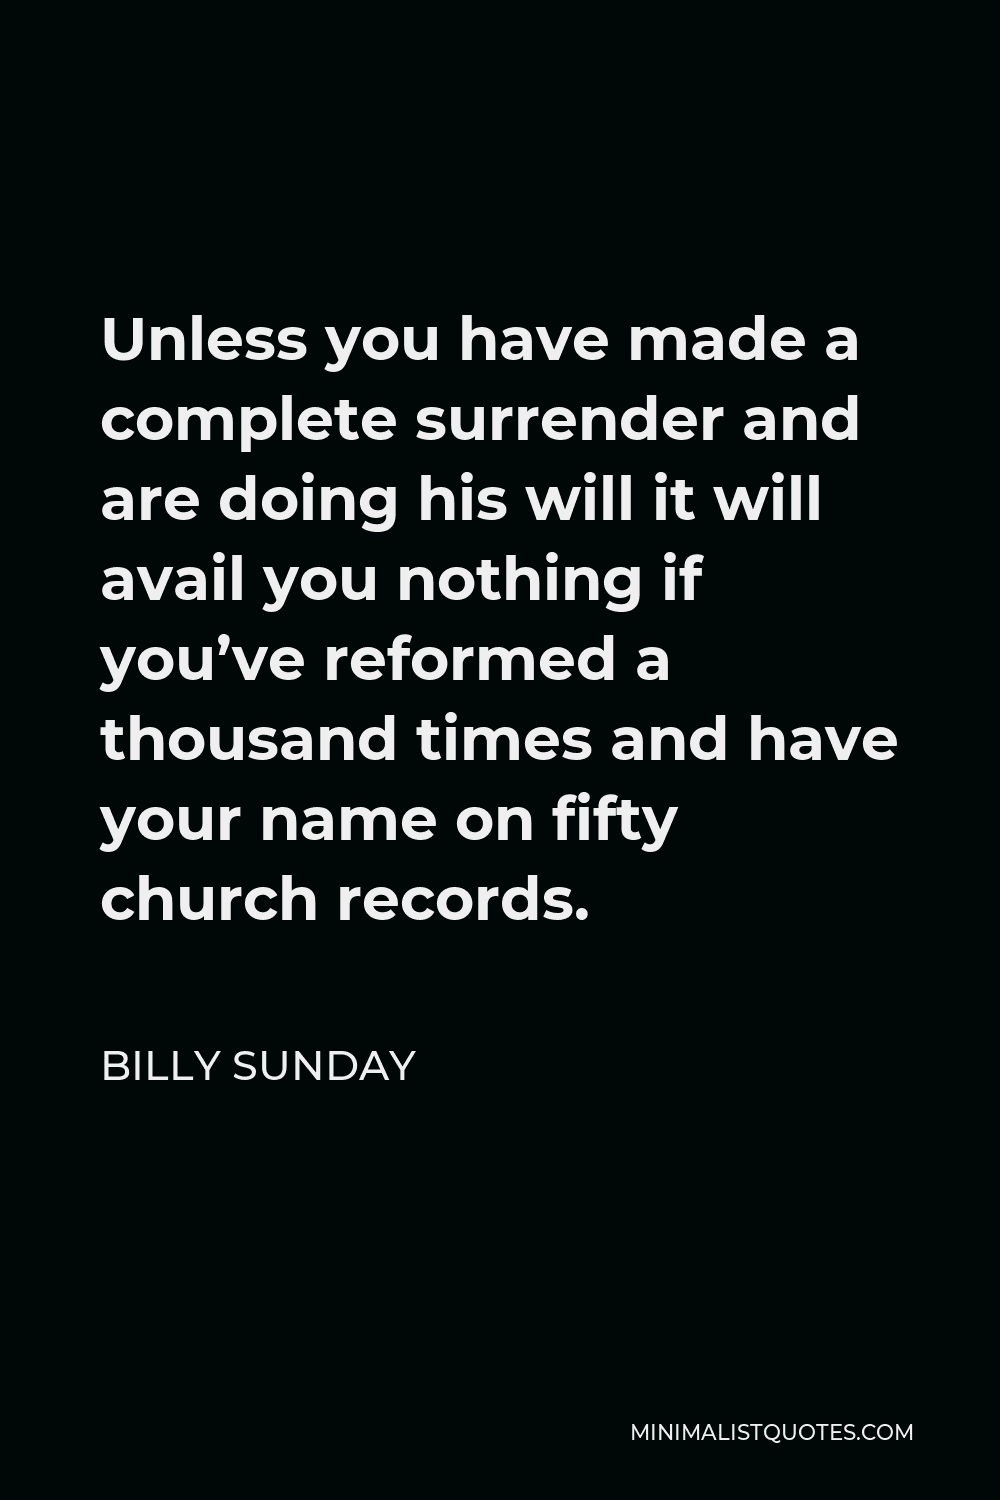 Billy Sunday Quote - Unless you have made a complete surrender and are doing his will it will avail you nothing if you’ve reformed a thousand times and have your name on fifty church records.